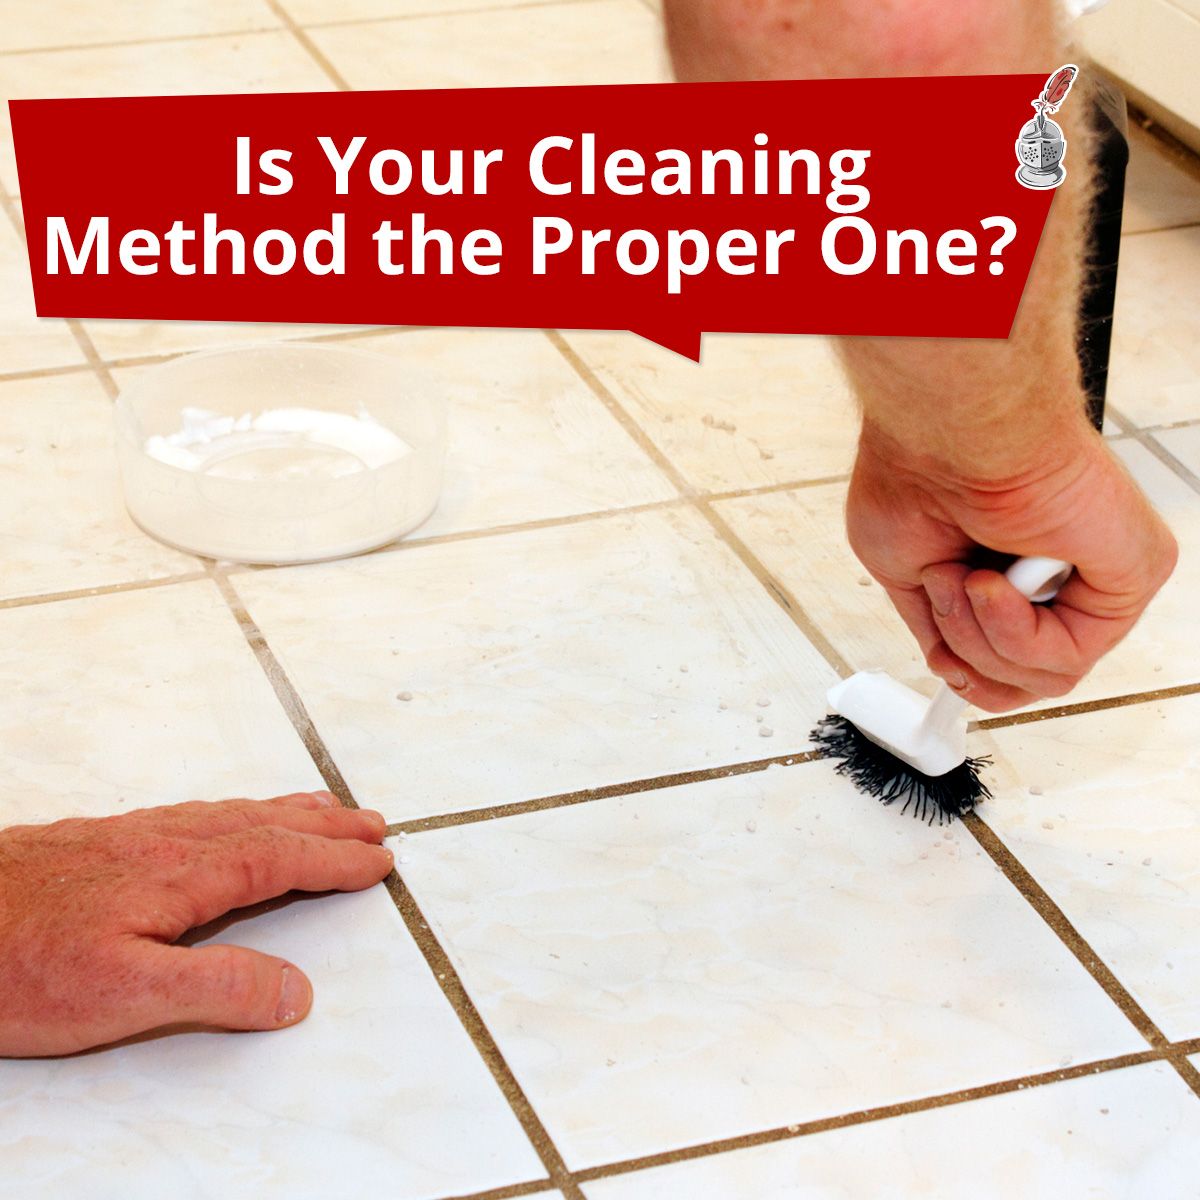 Is Your Cleaning Method the Proper One?